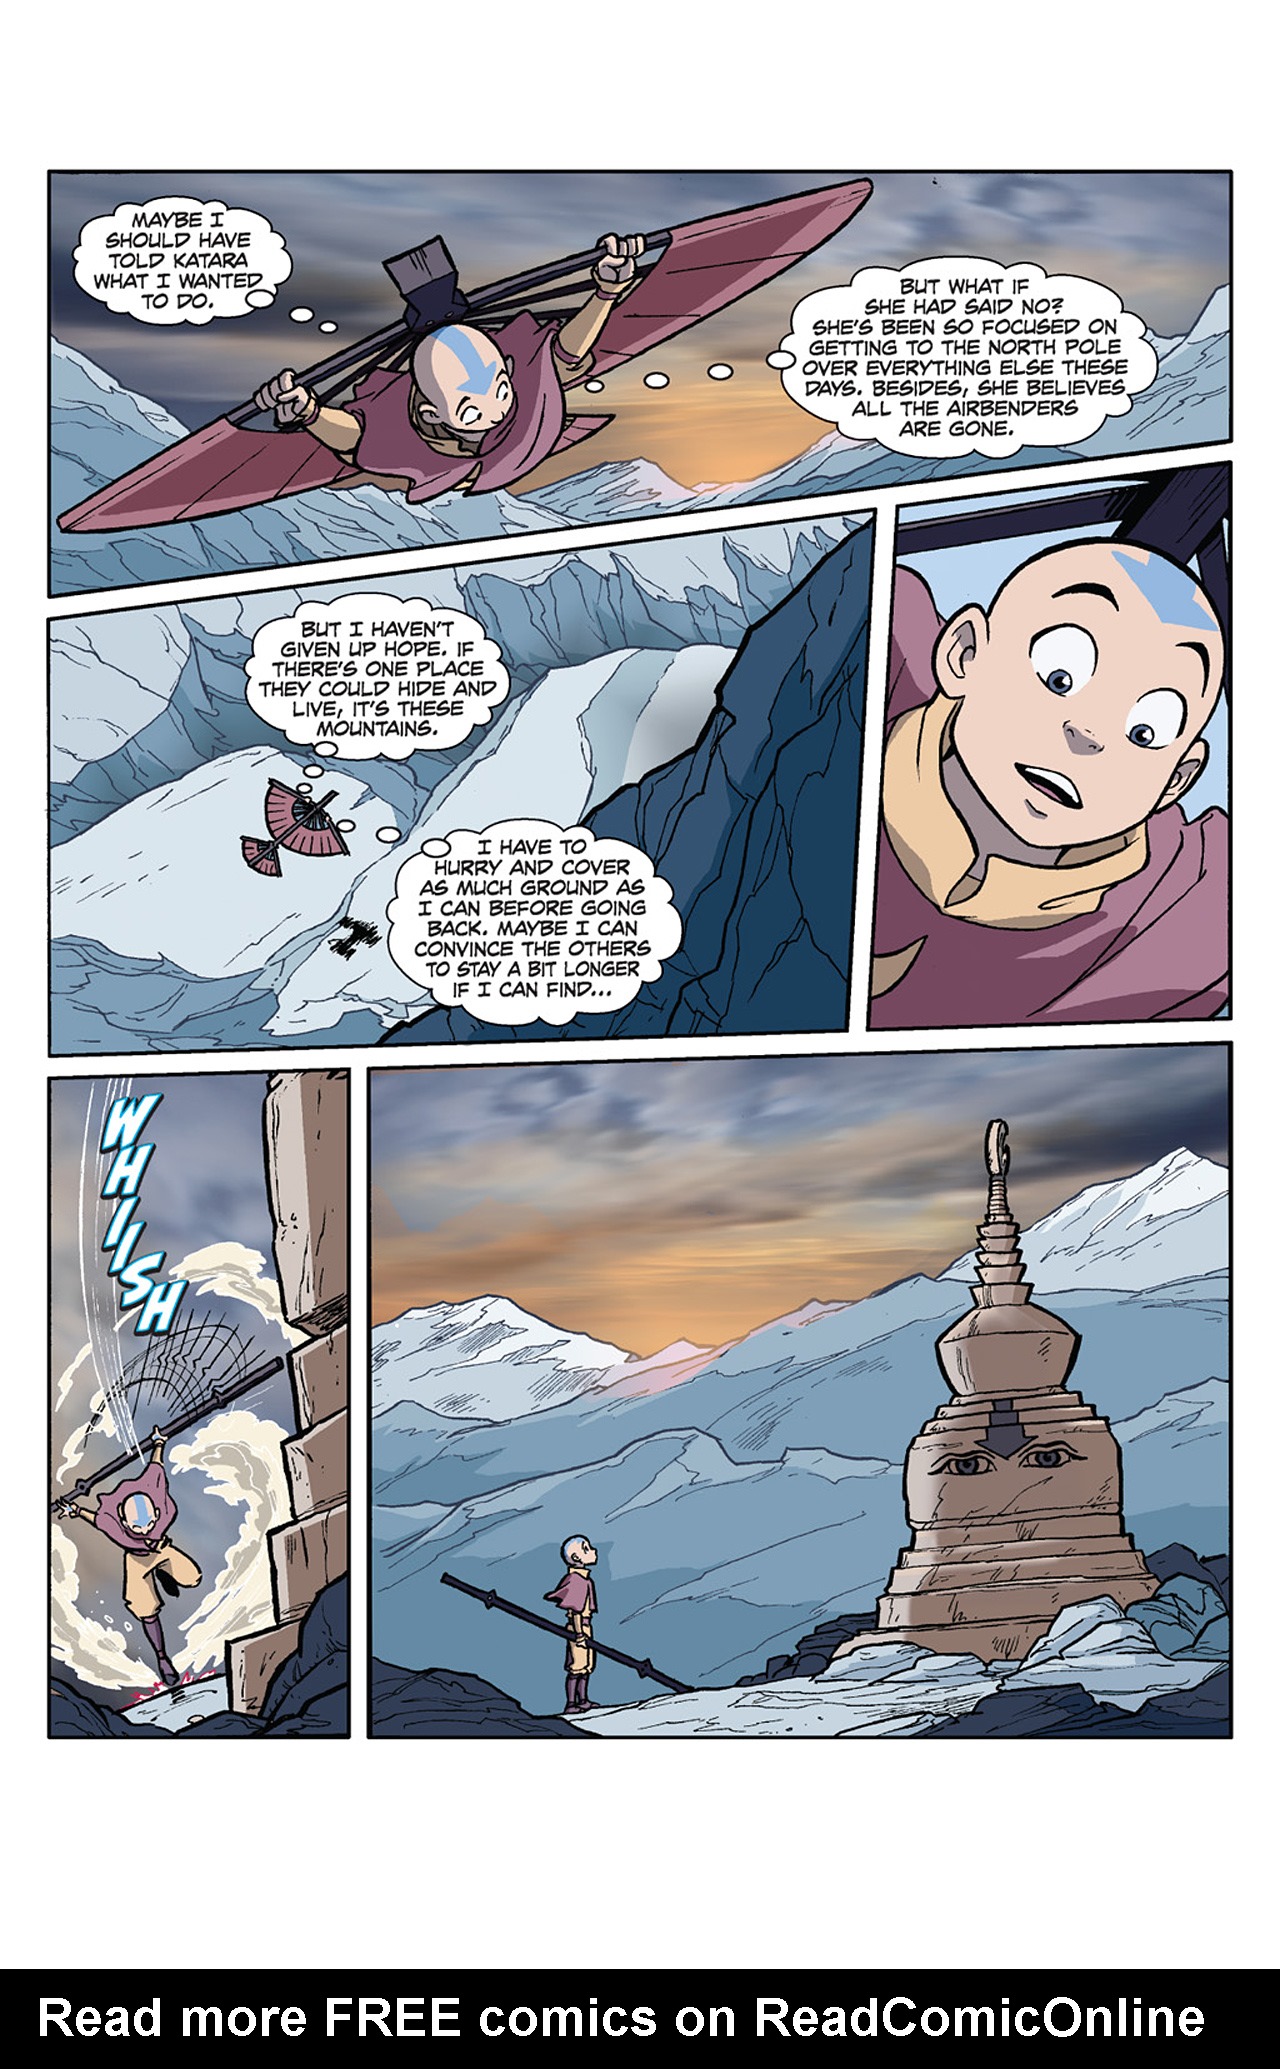 Read online Free Comic Book Day and Nickelodeon Avatar: The Last Airbender comic -  Issue # Full - 5